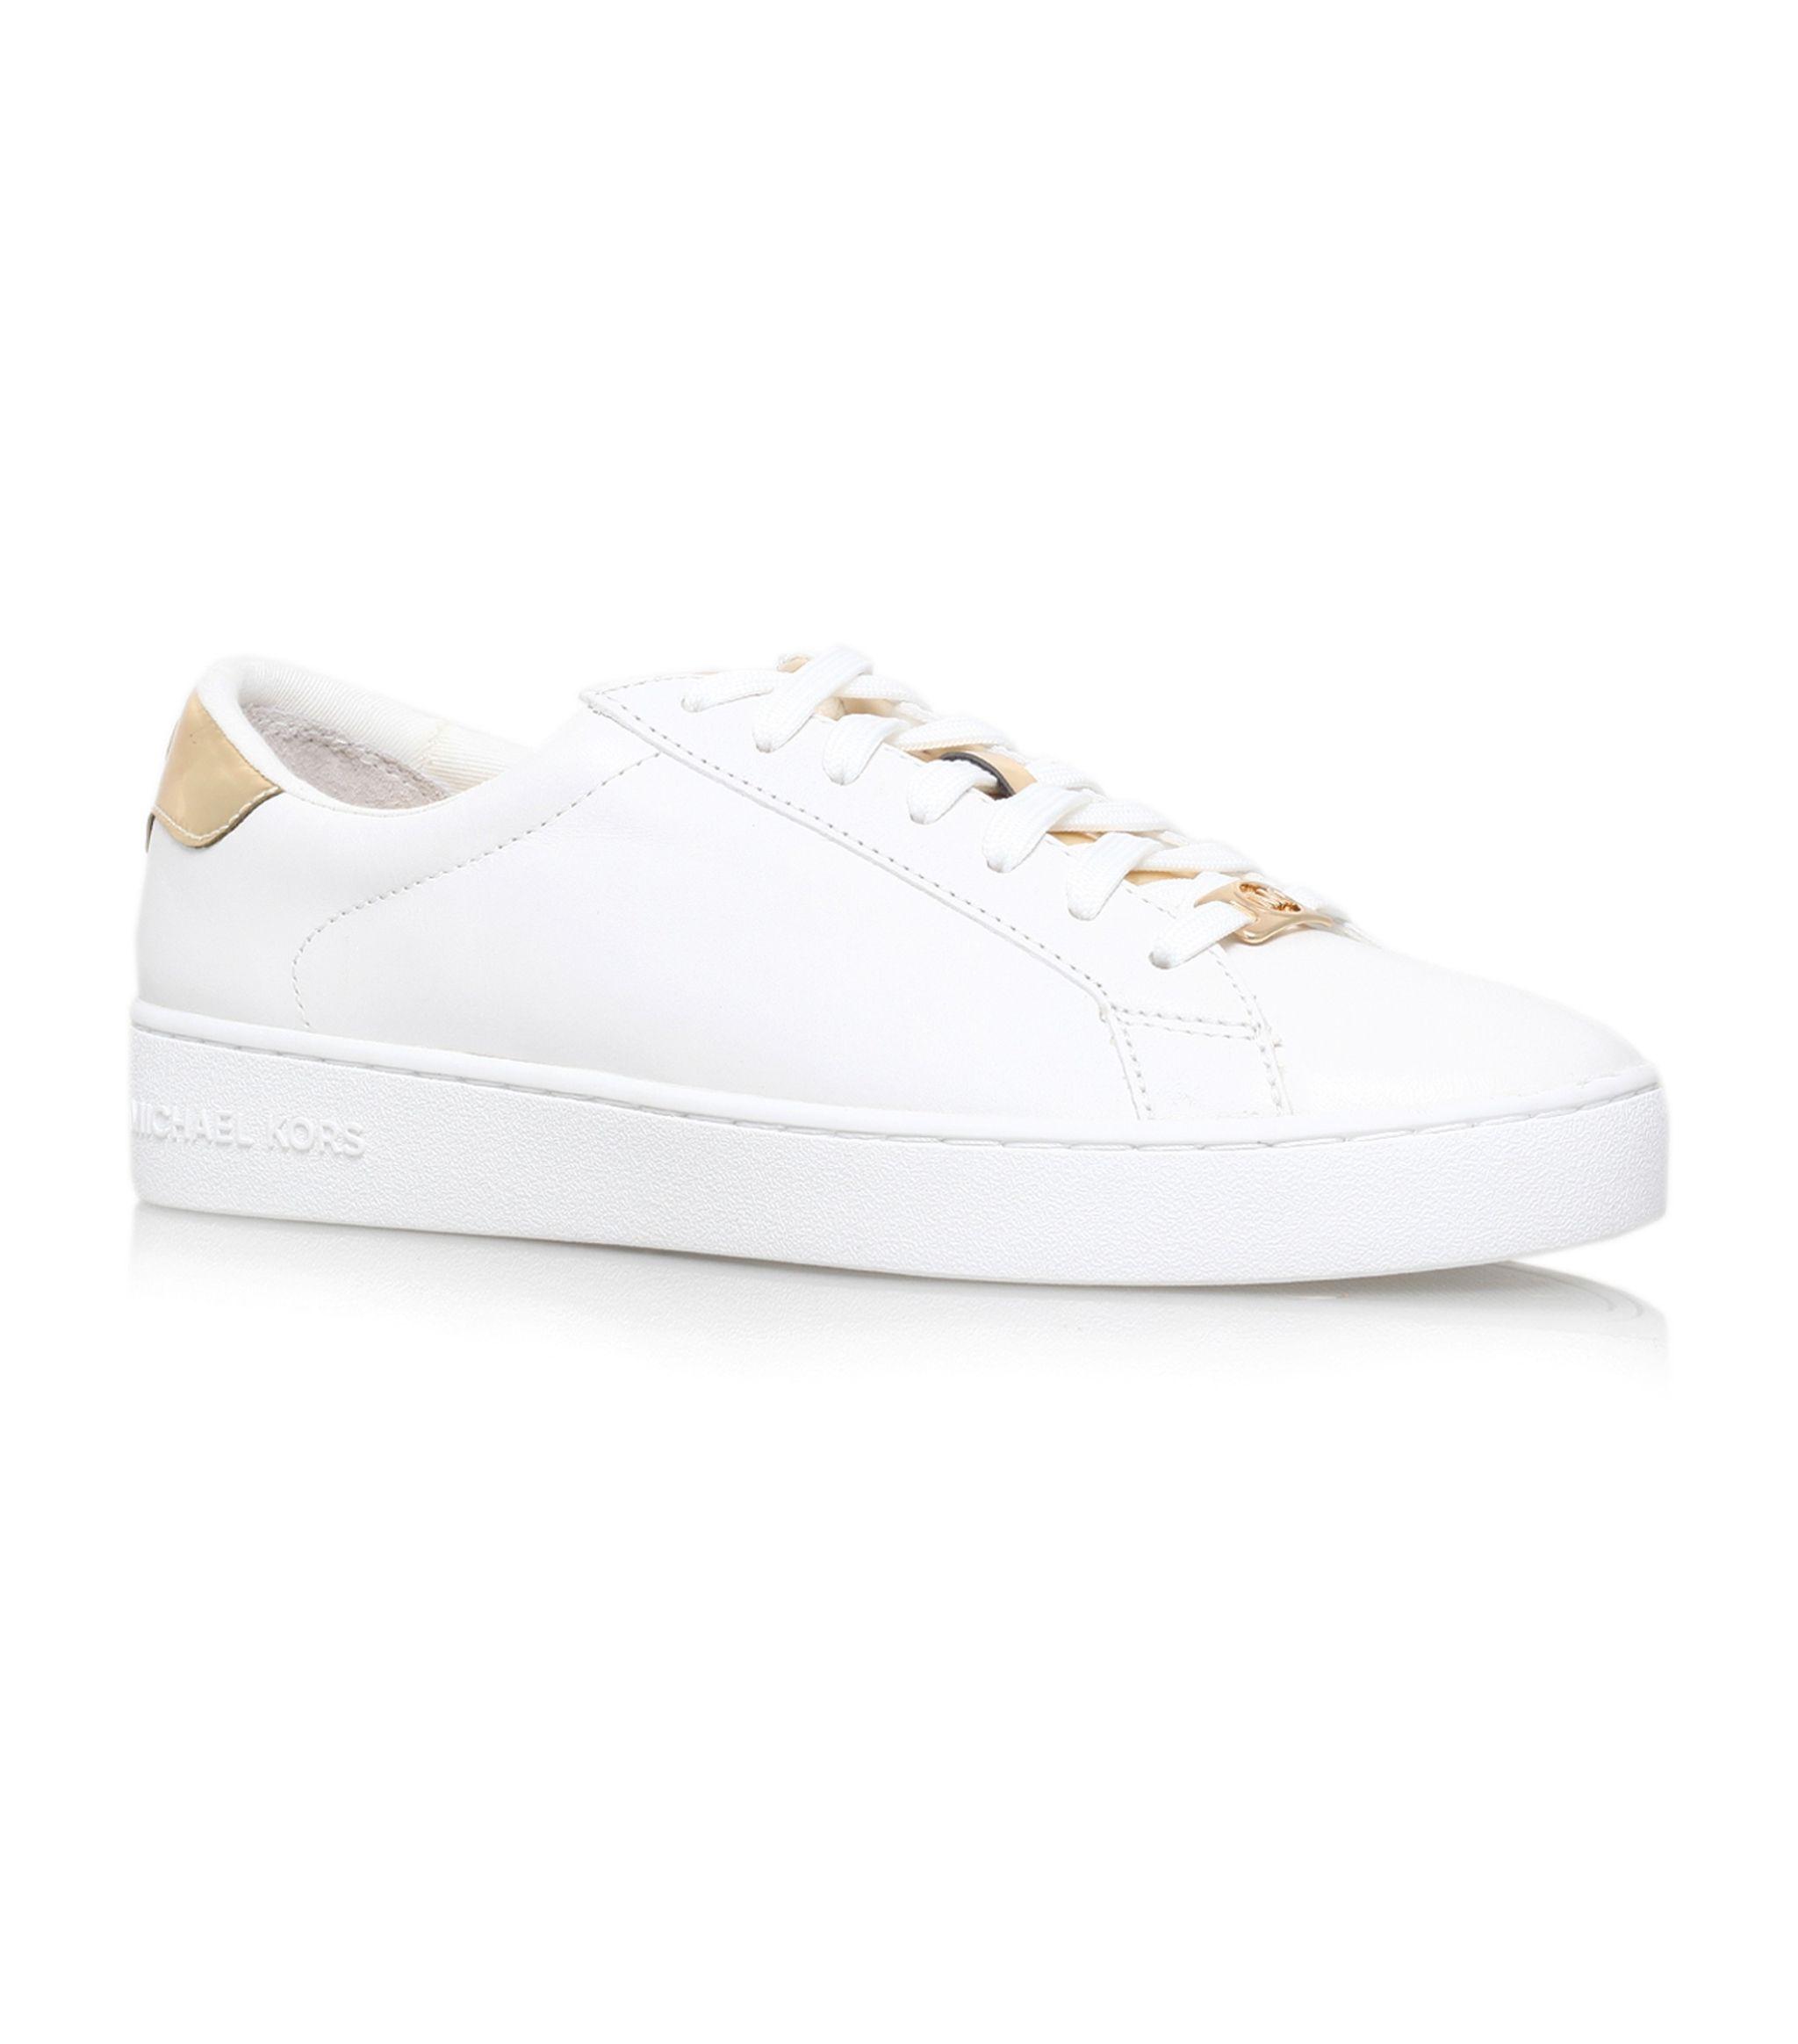 MICHAEL Michael Kors Leather Irving Lace-up Sneakers in White - Lyst